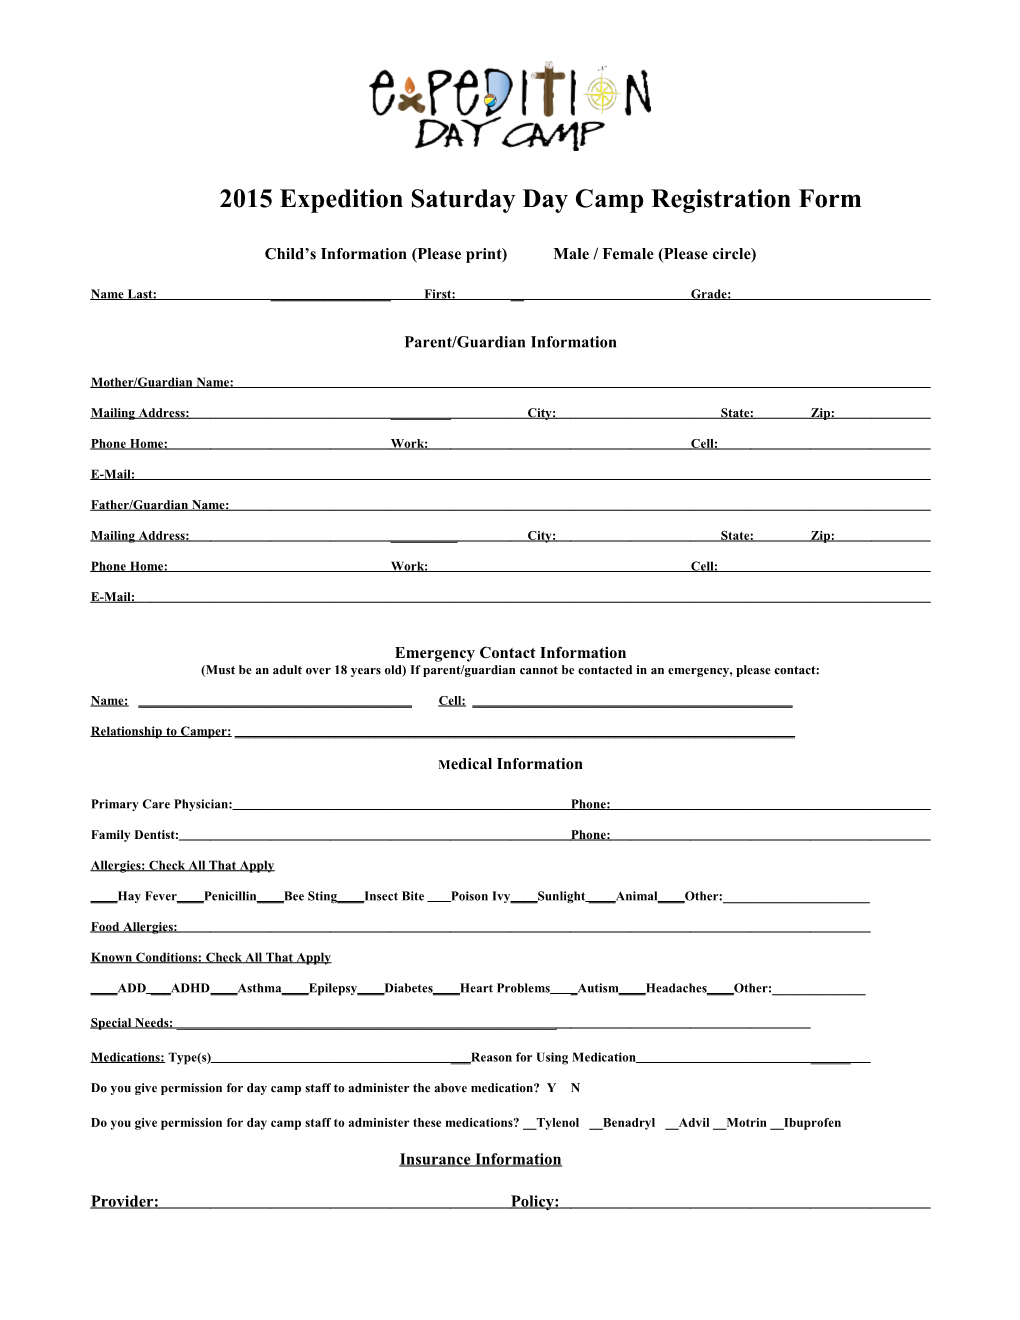 2011 Expedition Day Camp Registration Form